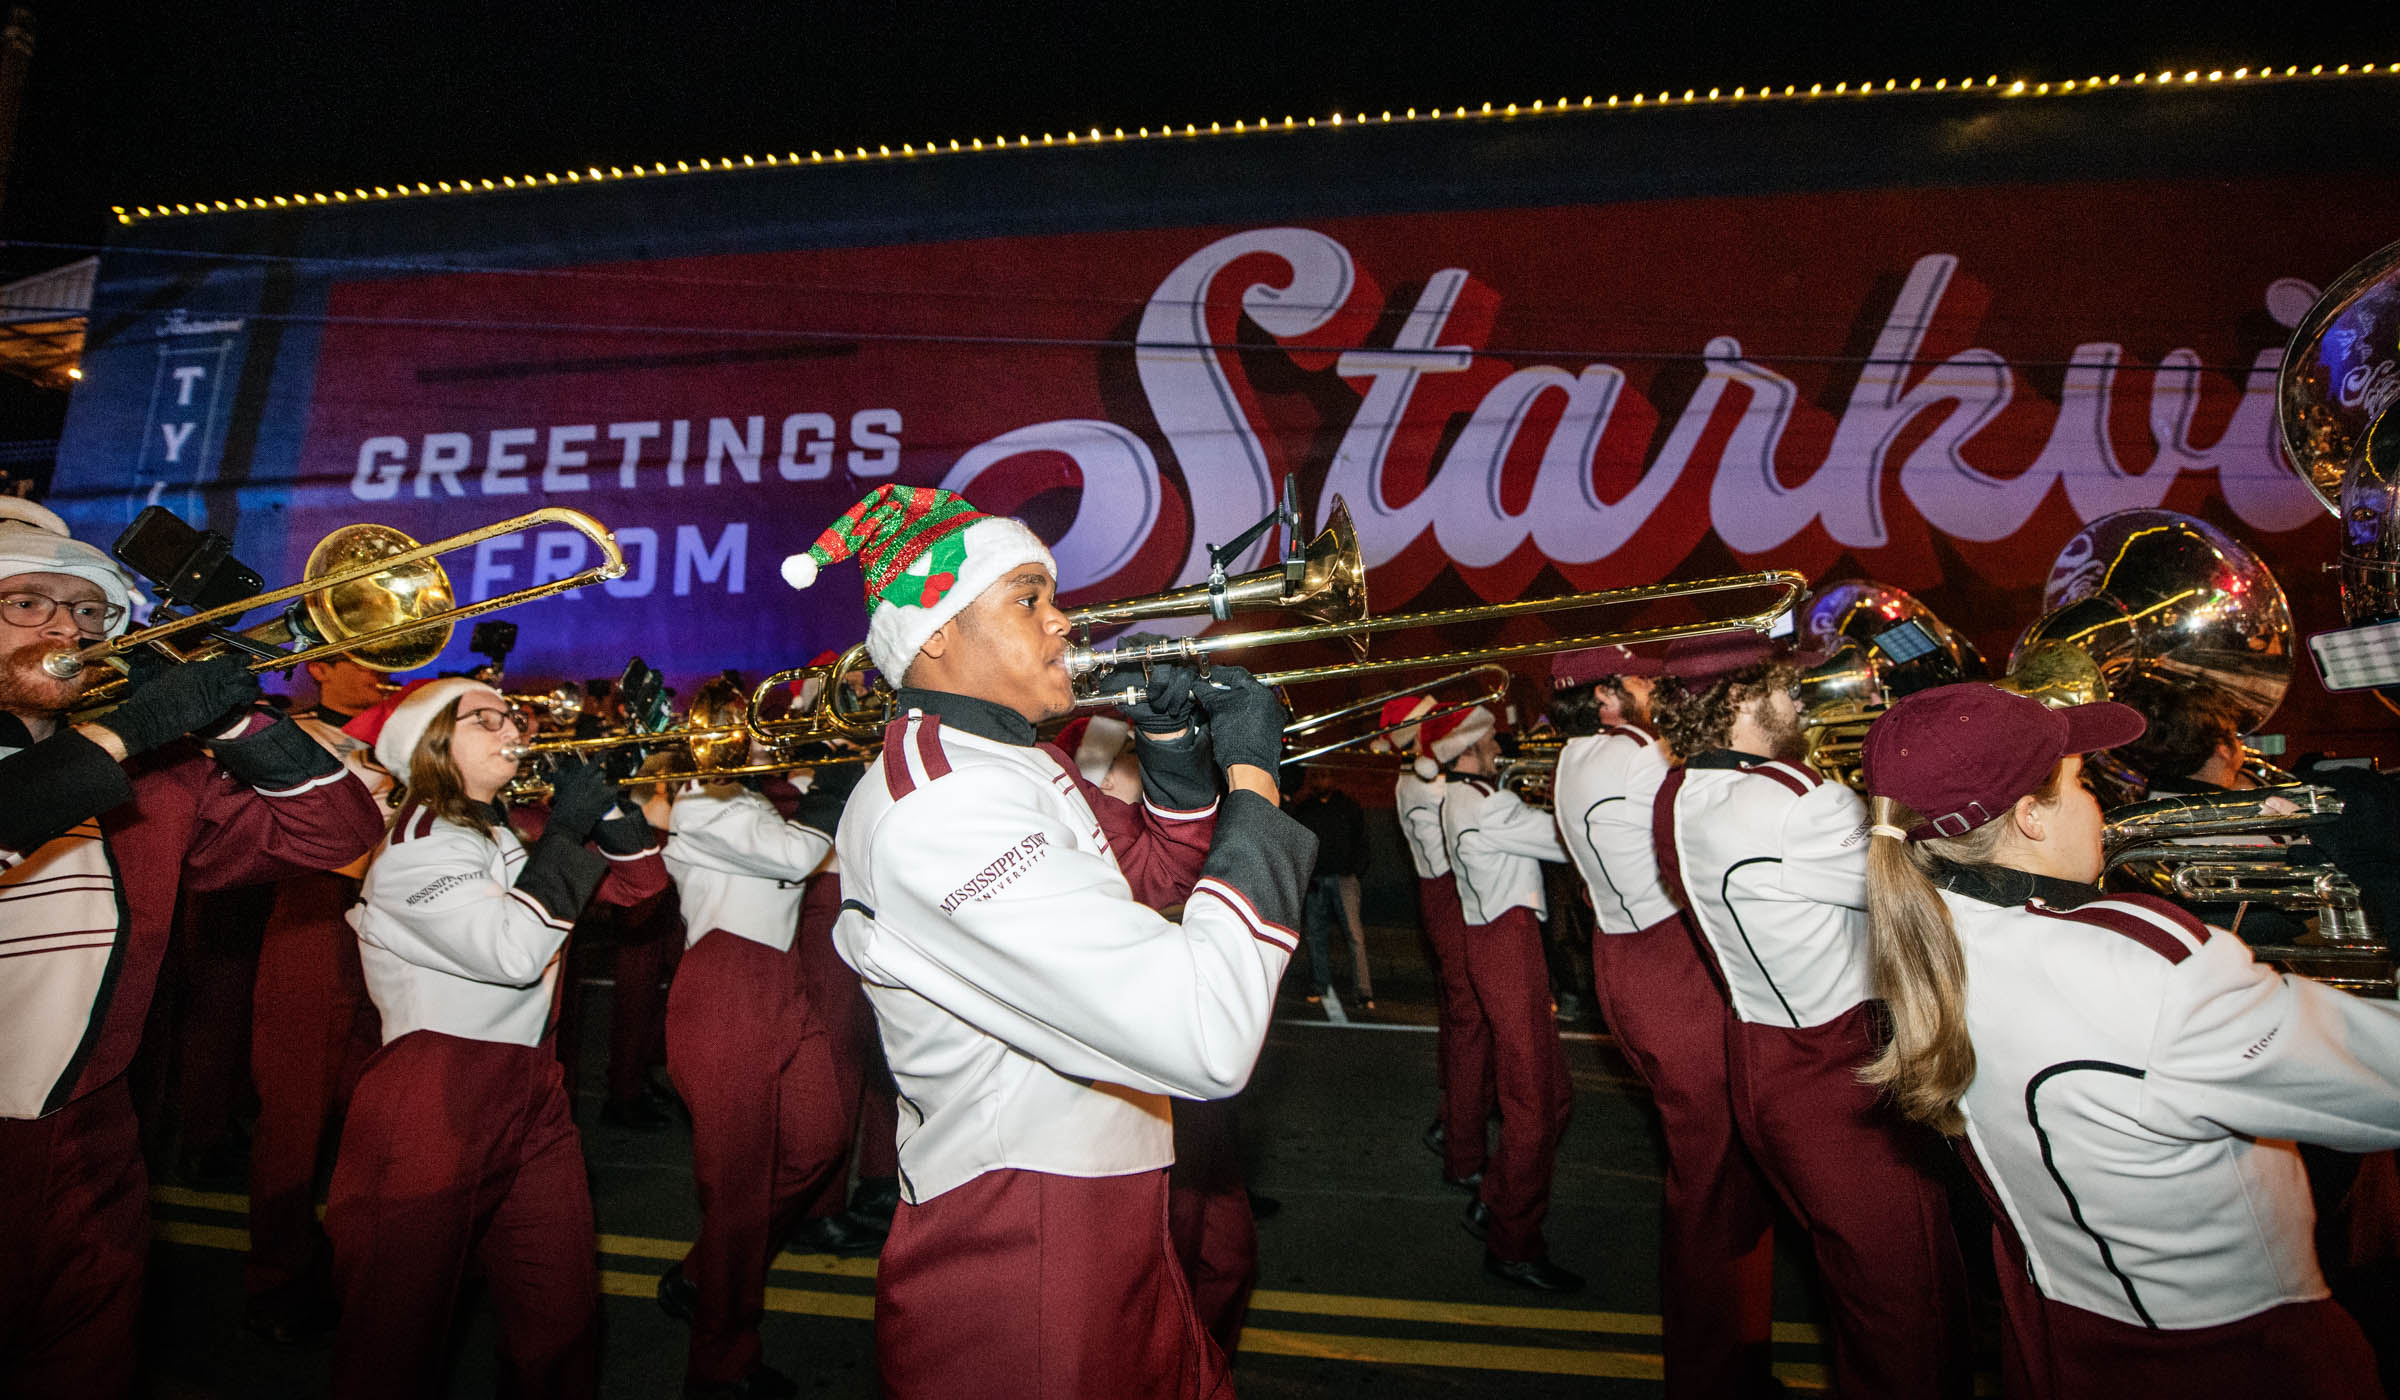 Members of MSU&#039;s Famous Maroon Marching Band march past the &quot;Greetings From Starkville&quot; mural during the Christmas parade.